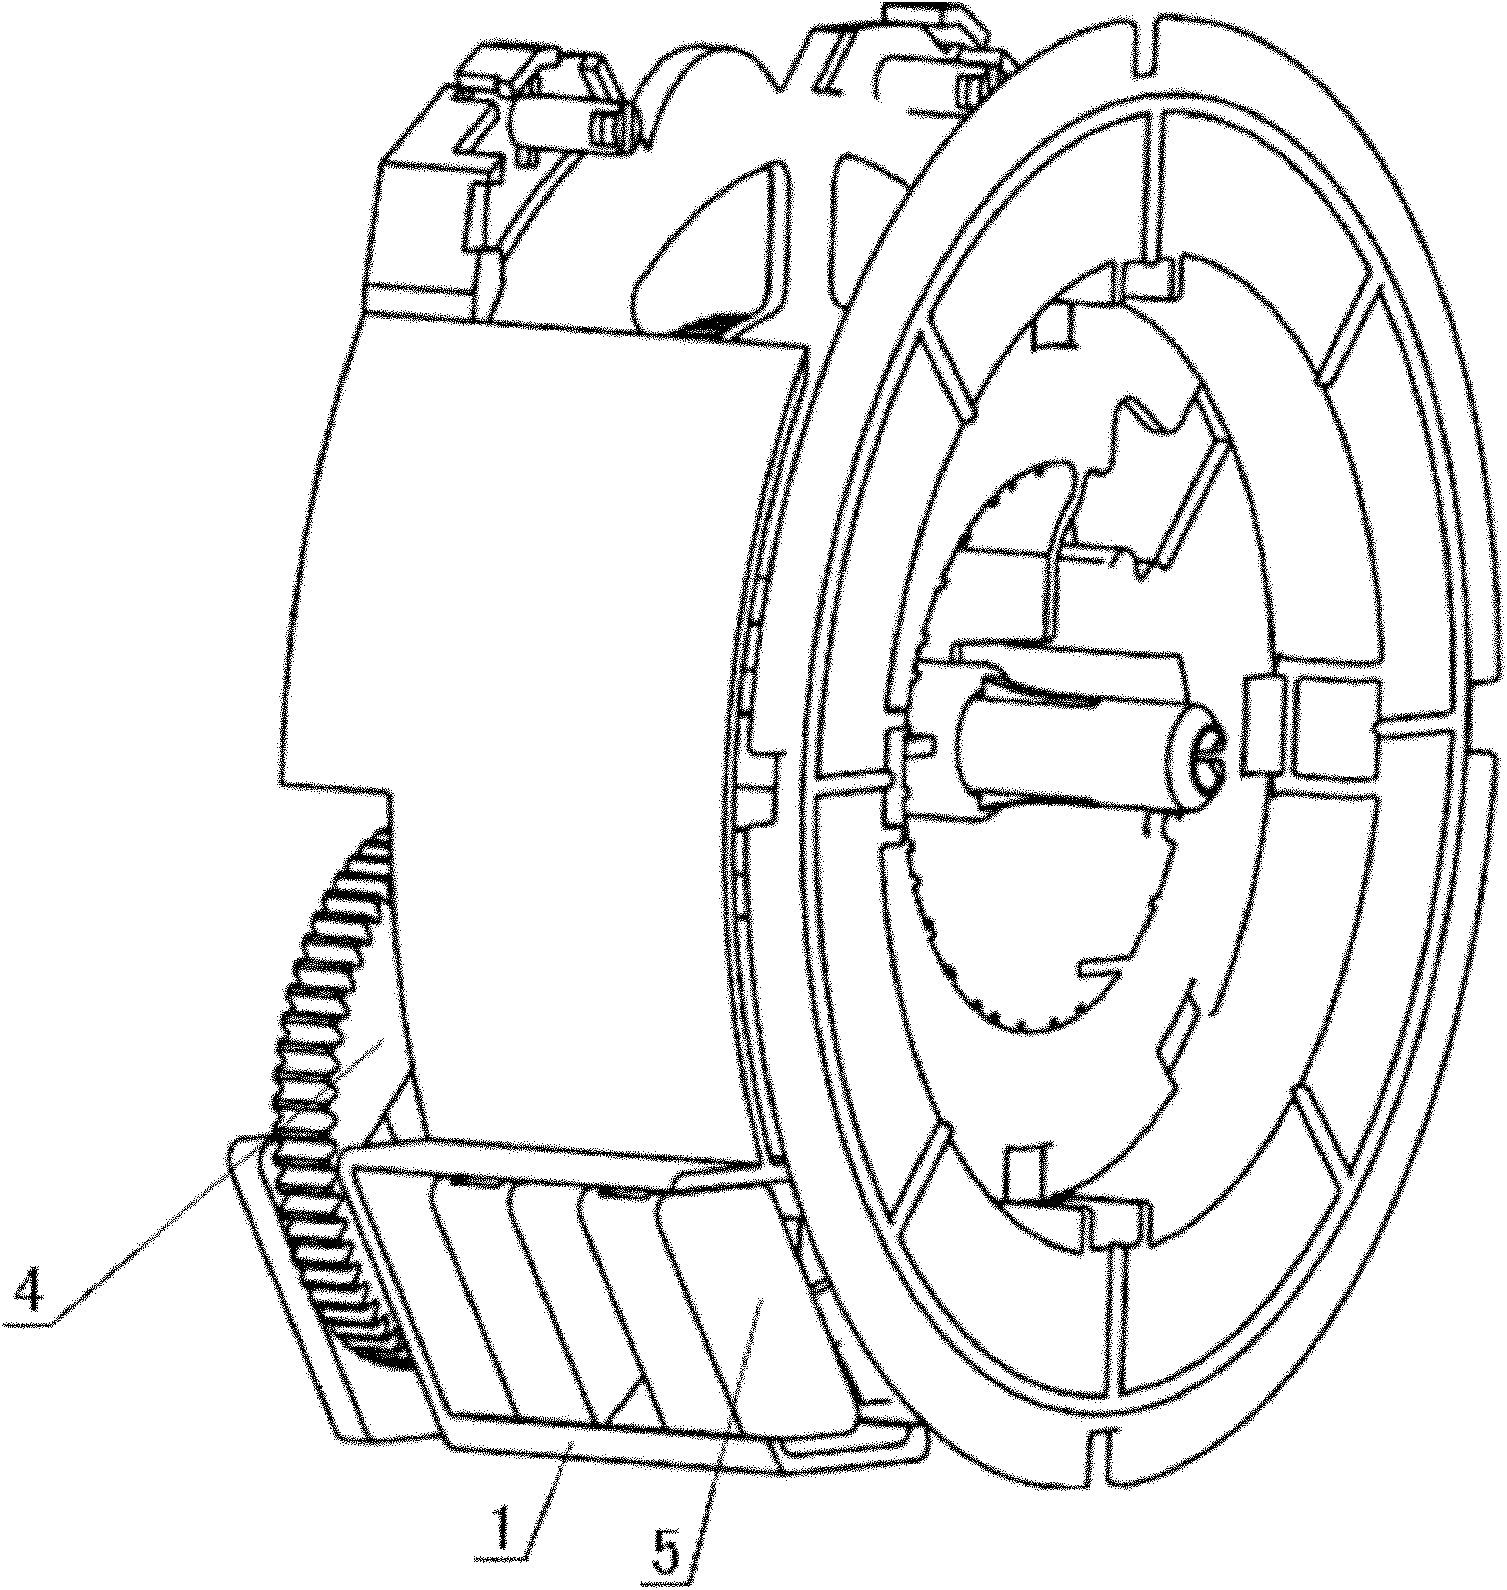 Swinging wire speed reducing device of wire winder